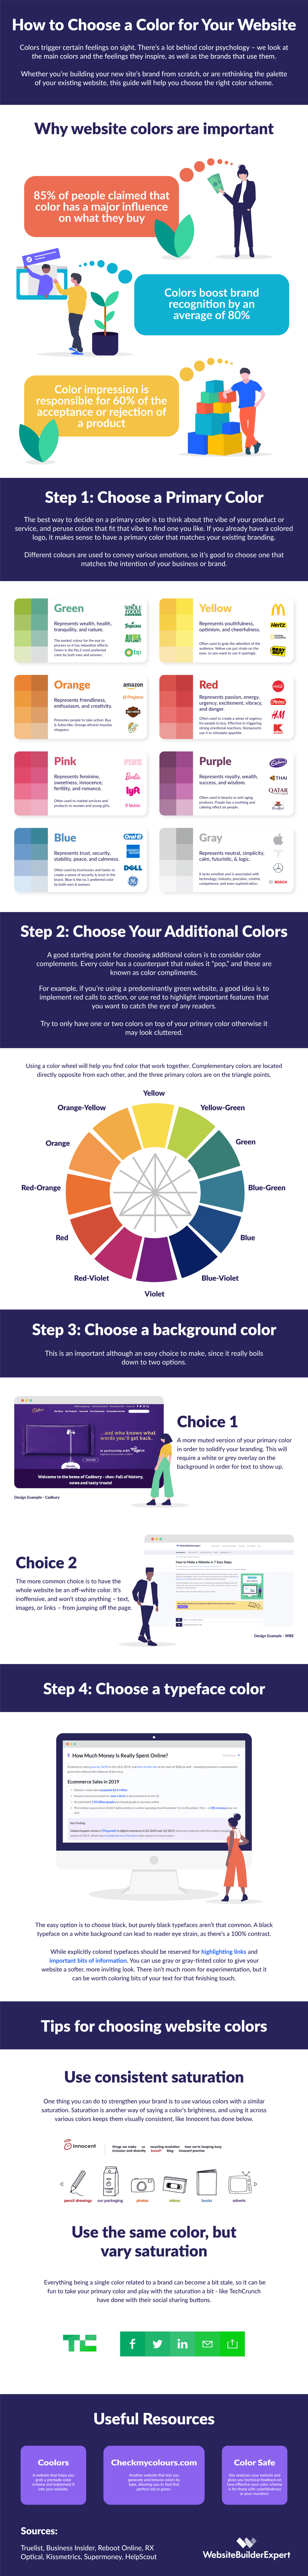 How to Choose Good Website Color Schemes - infographic